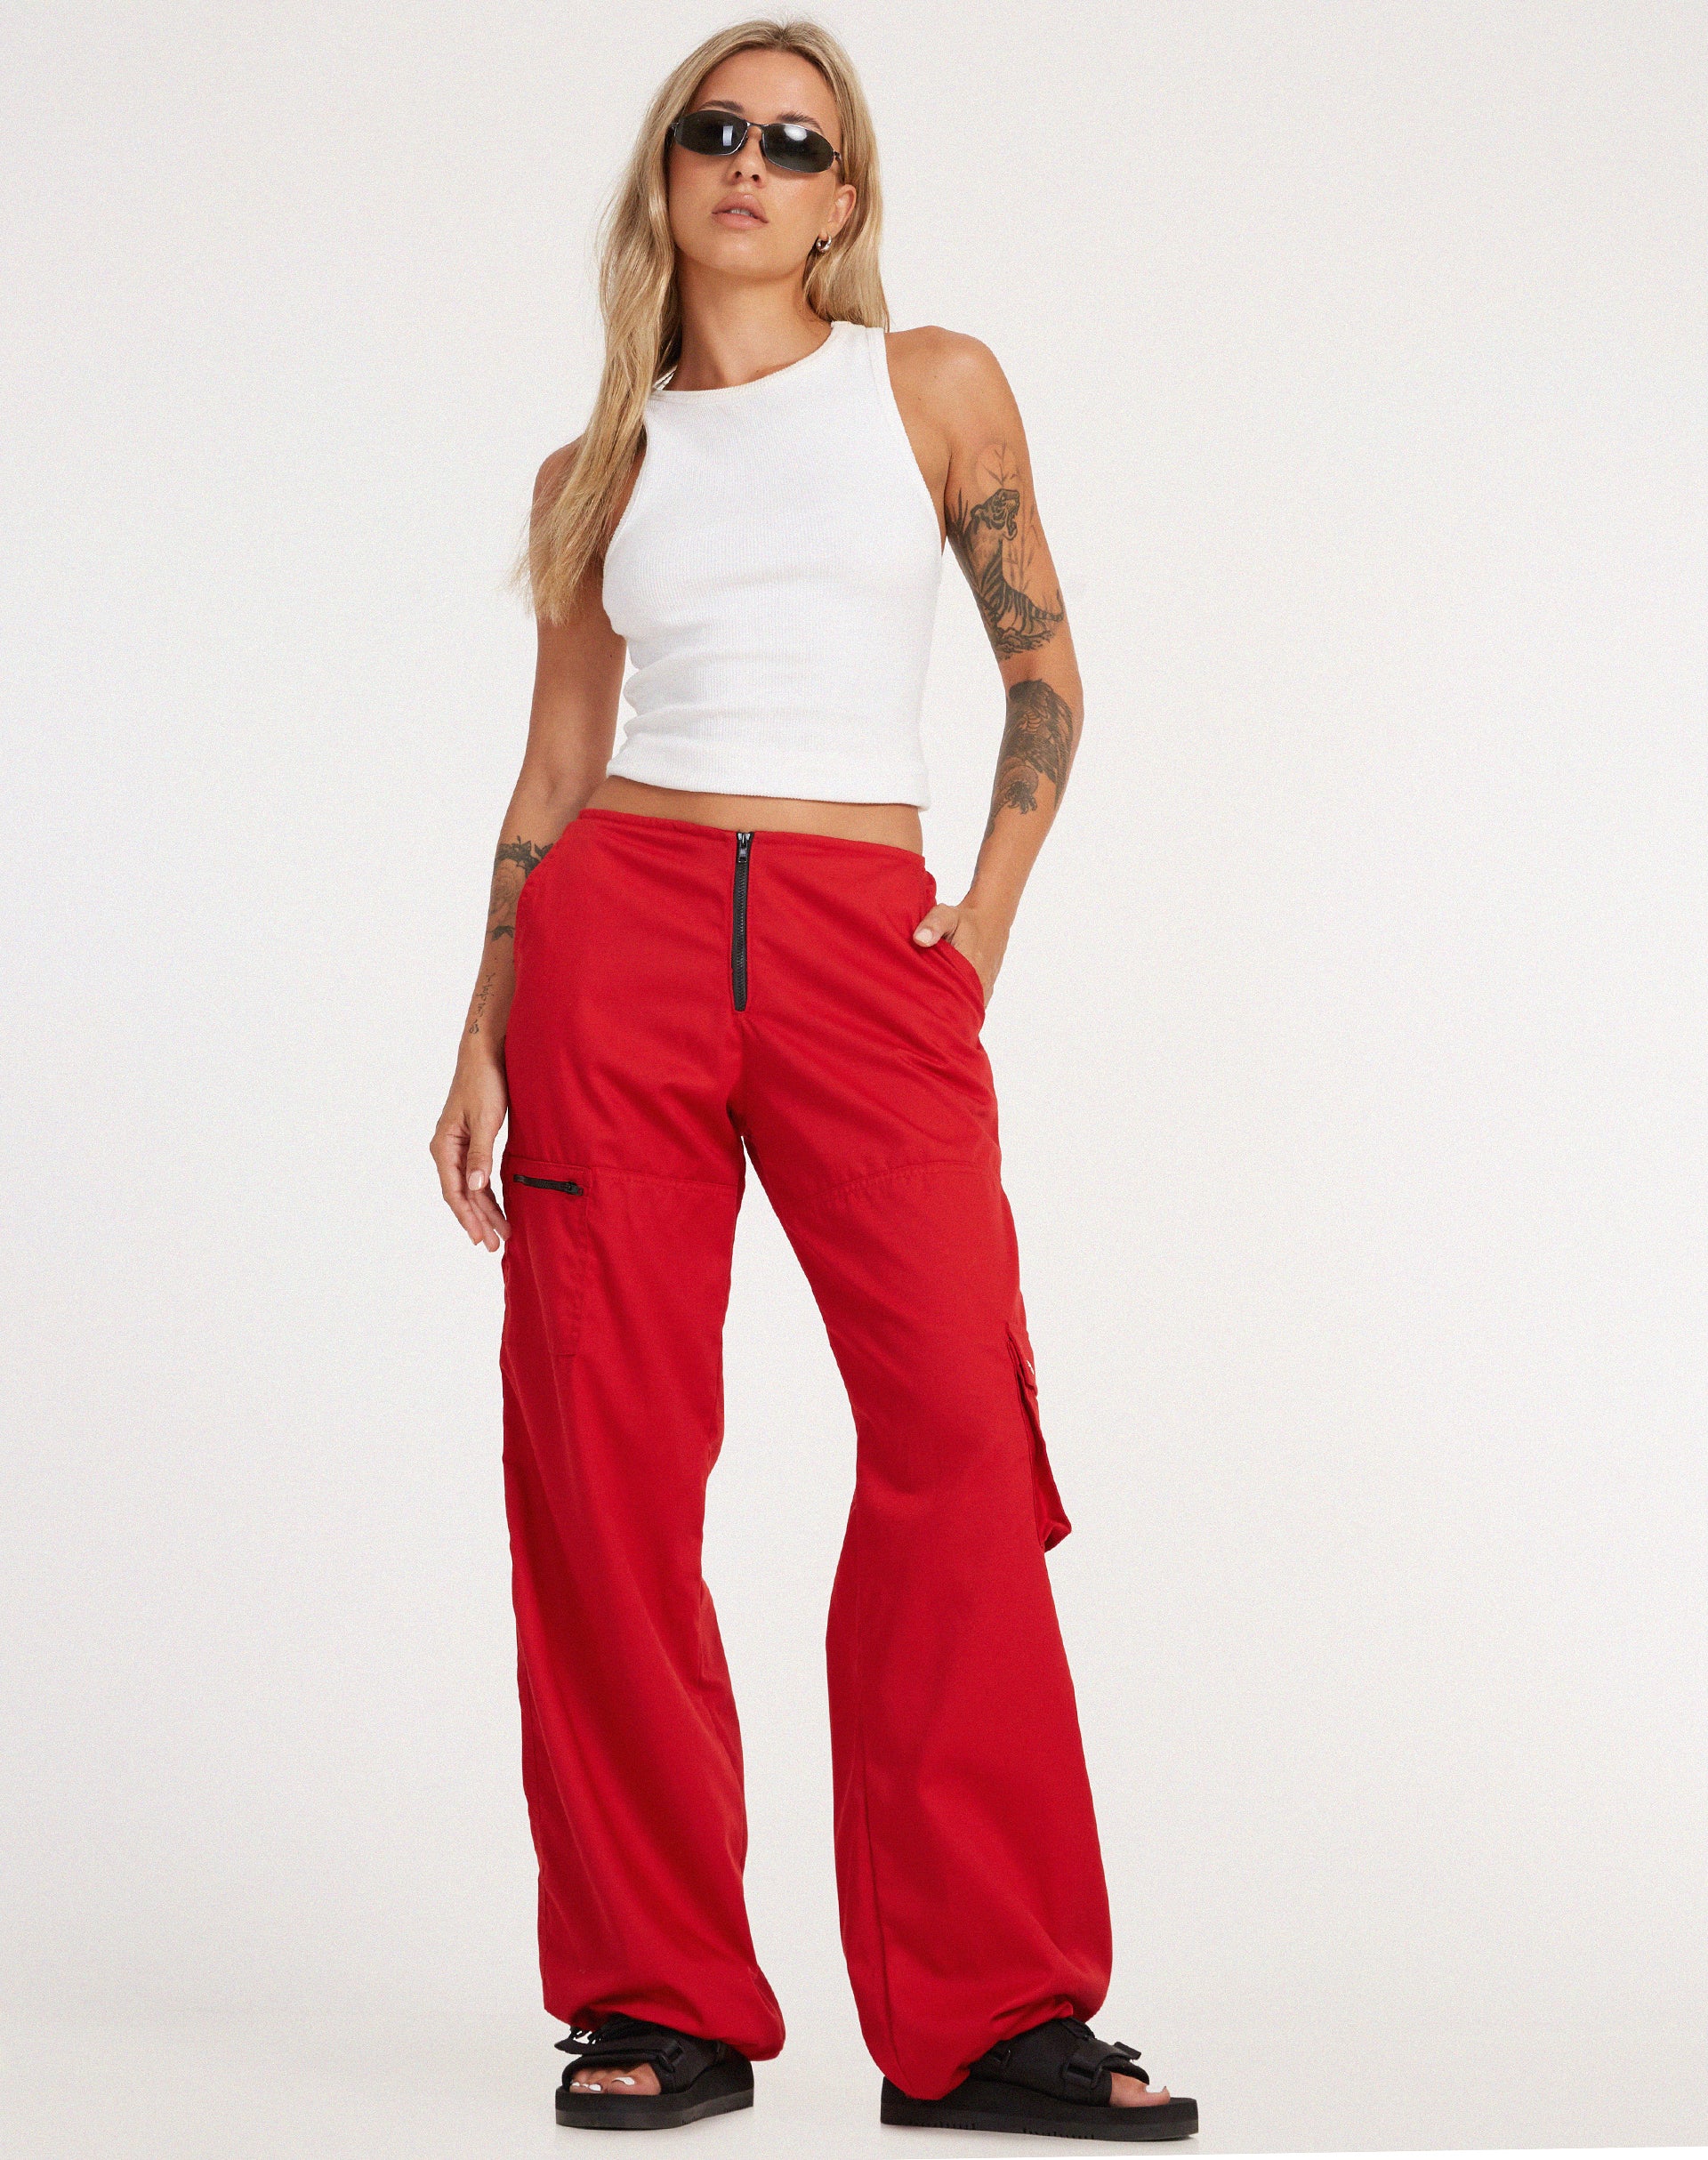 Black And Red Cargo Pants | Urban Streetwear